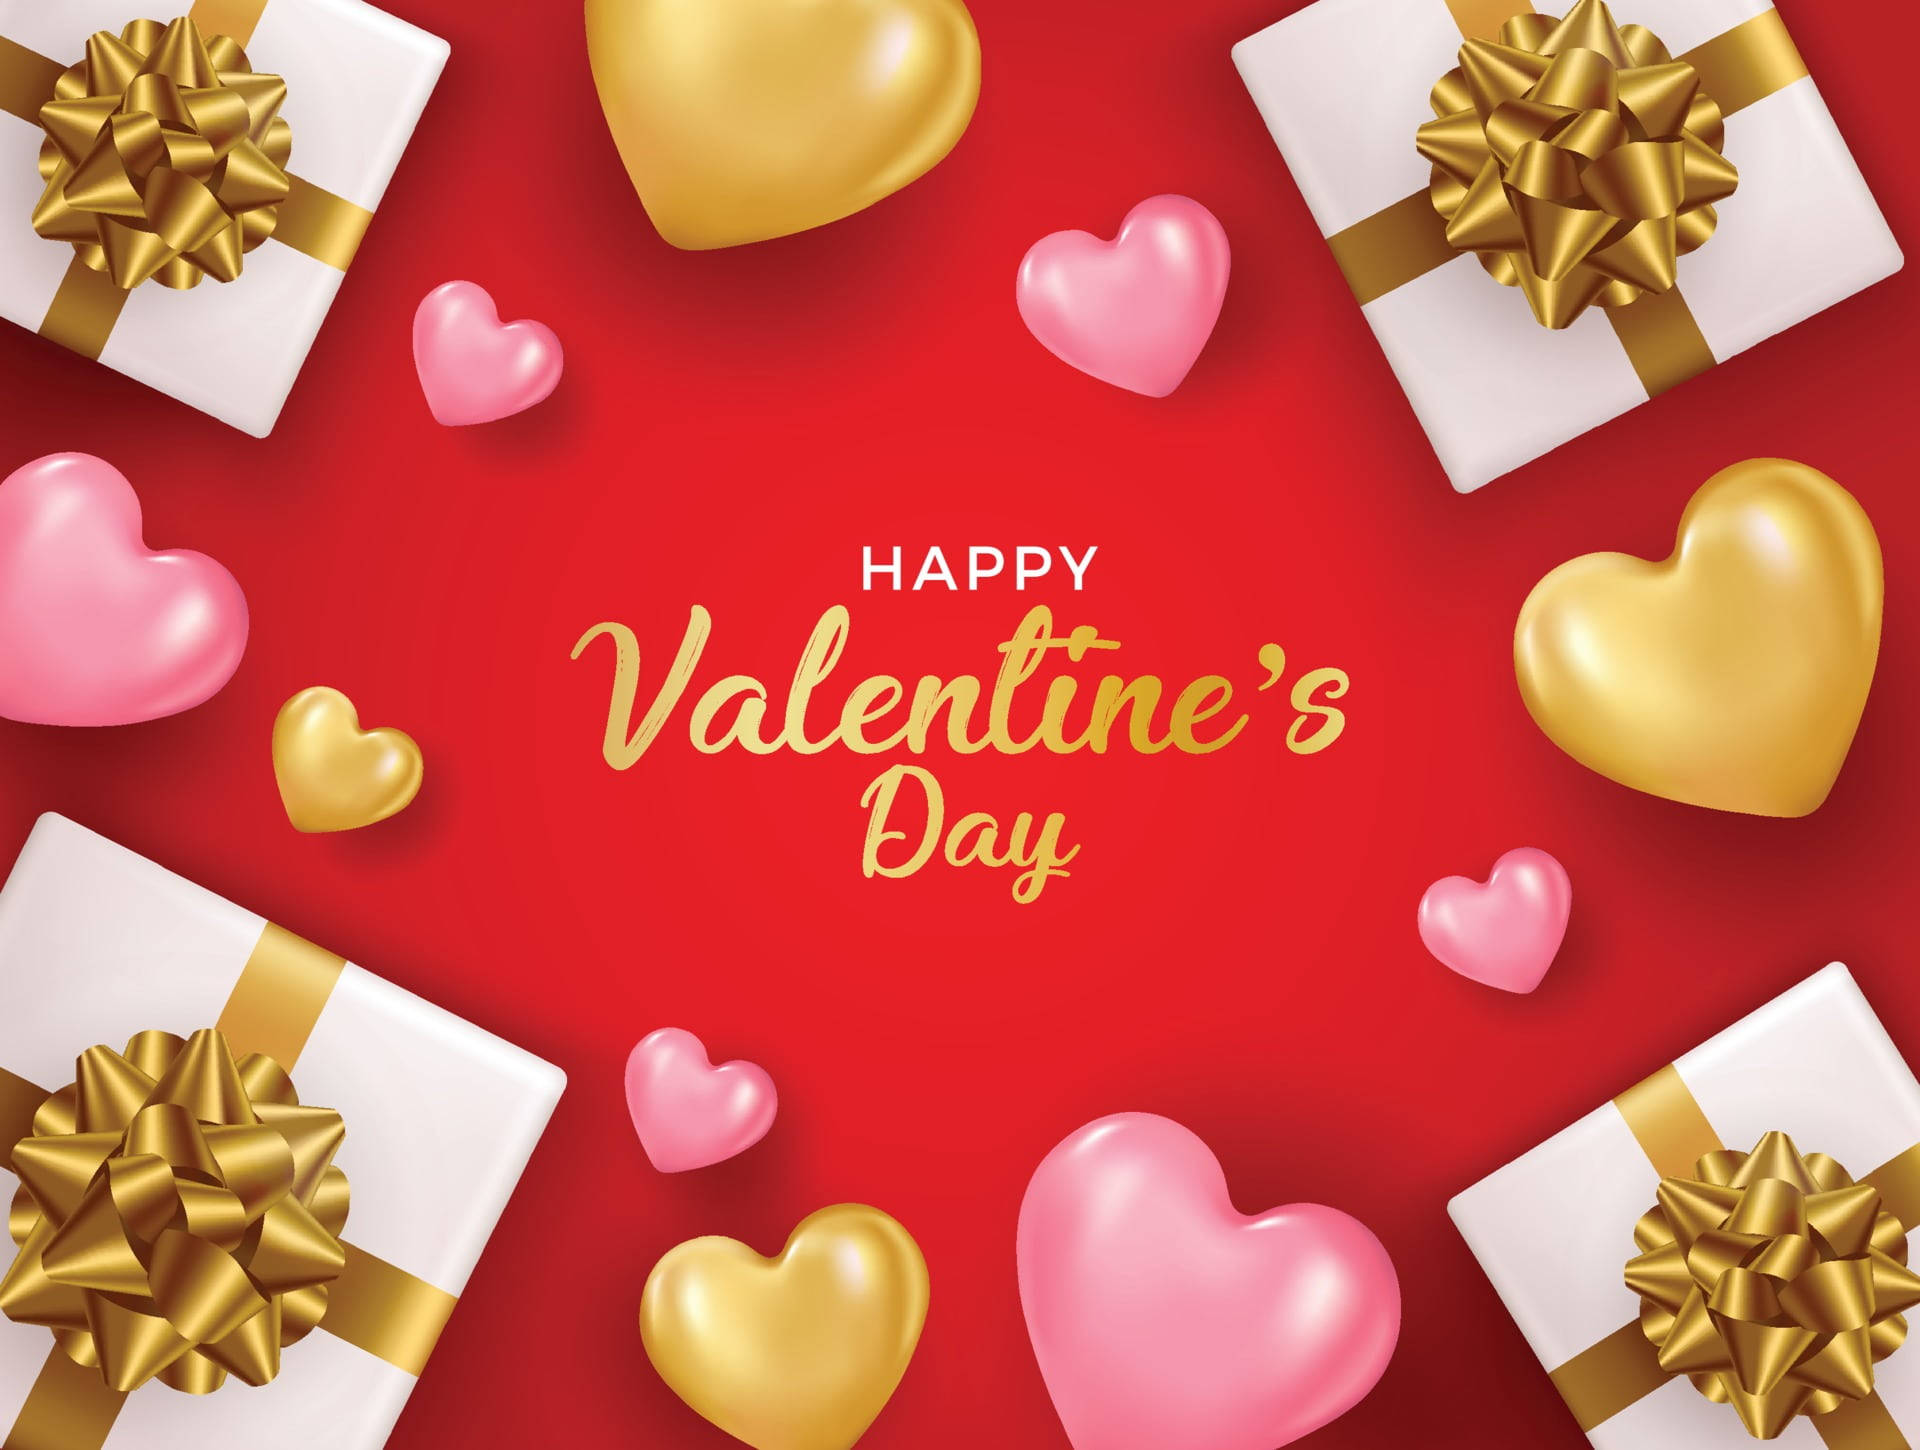 Happy Valentine’s Day Gold Gifts Wallpaper